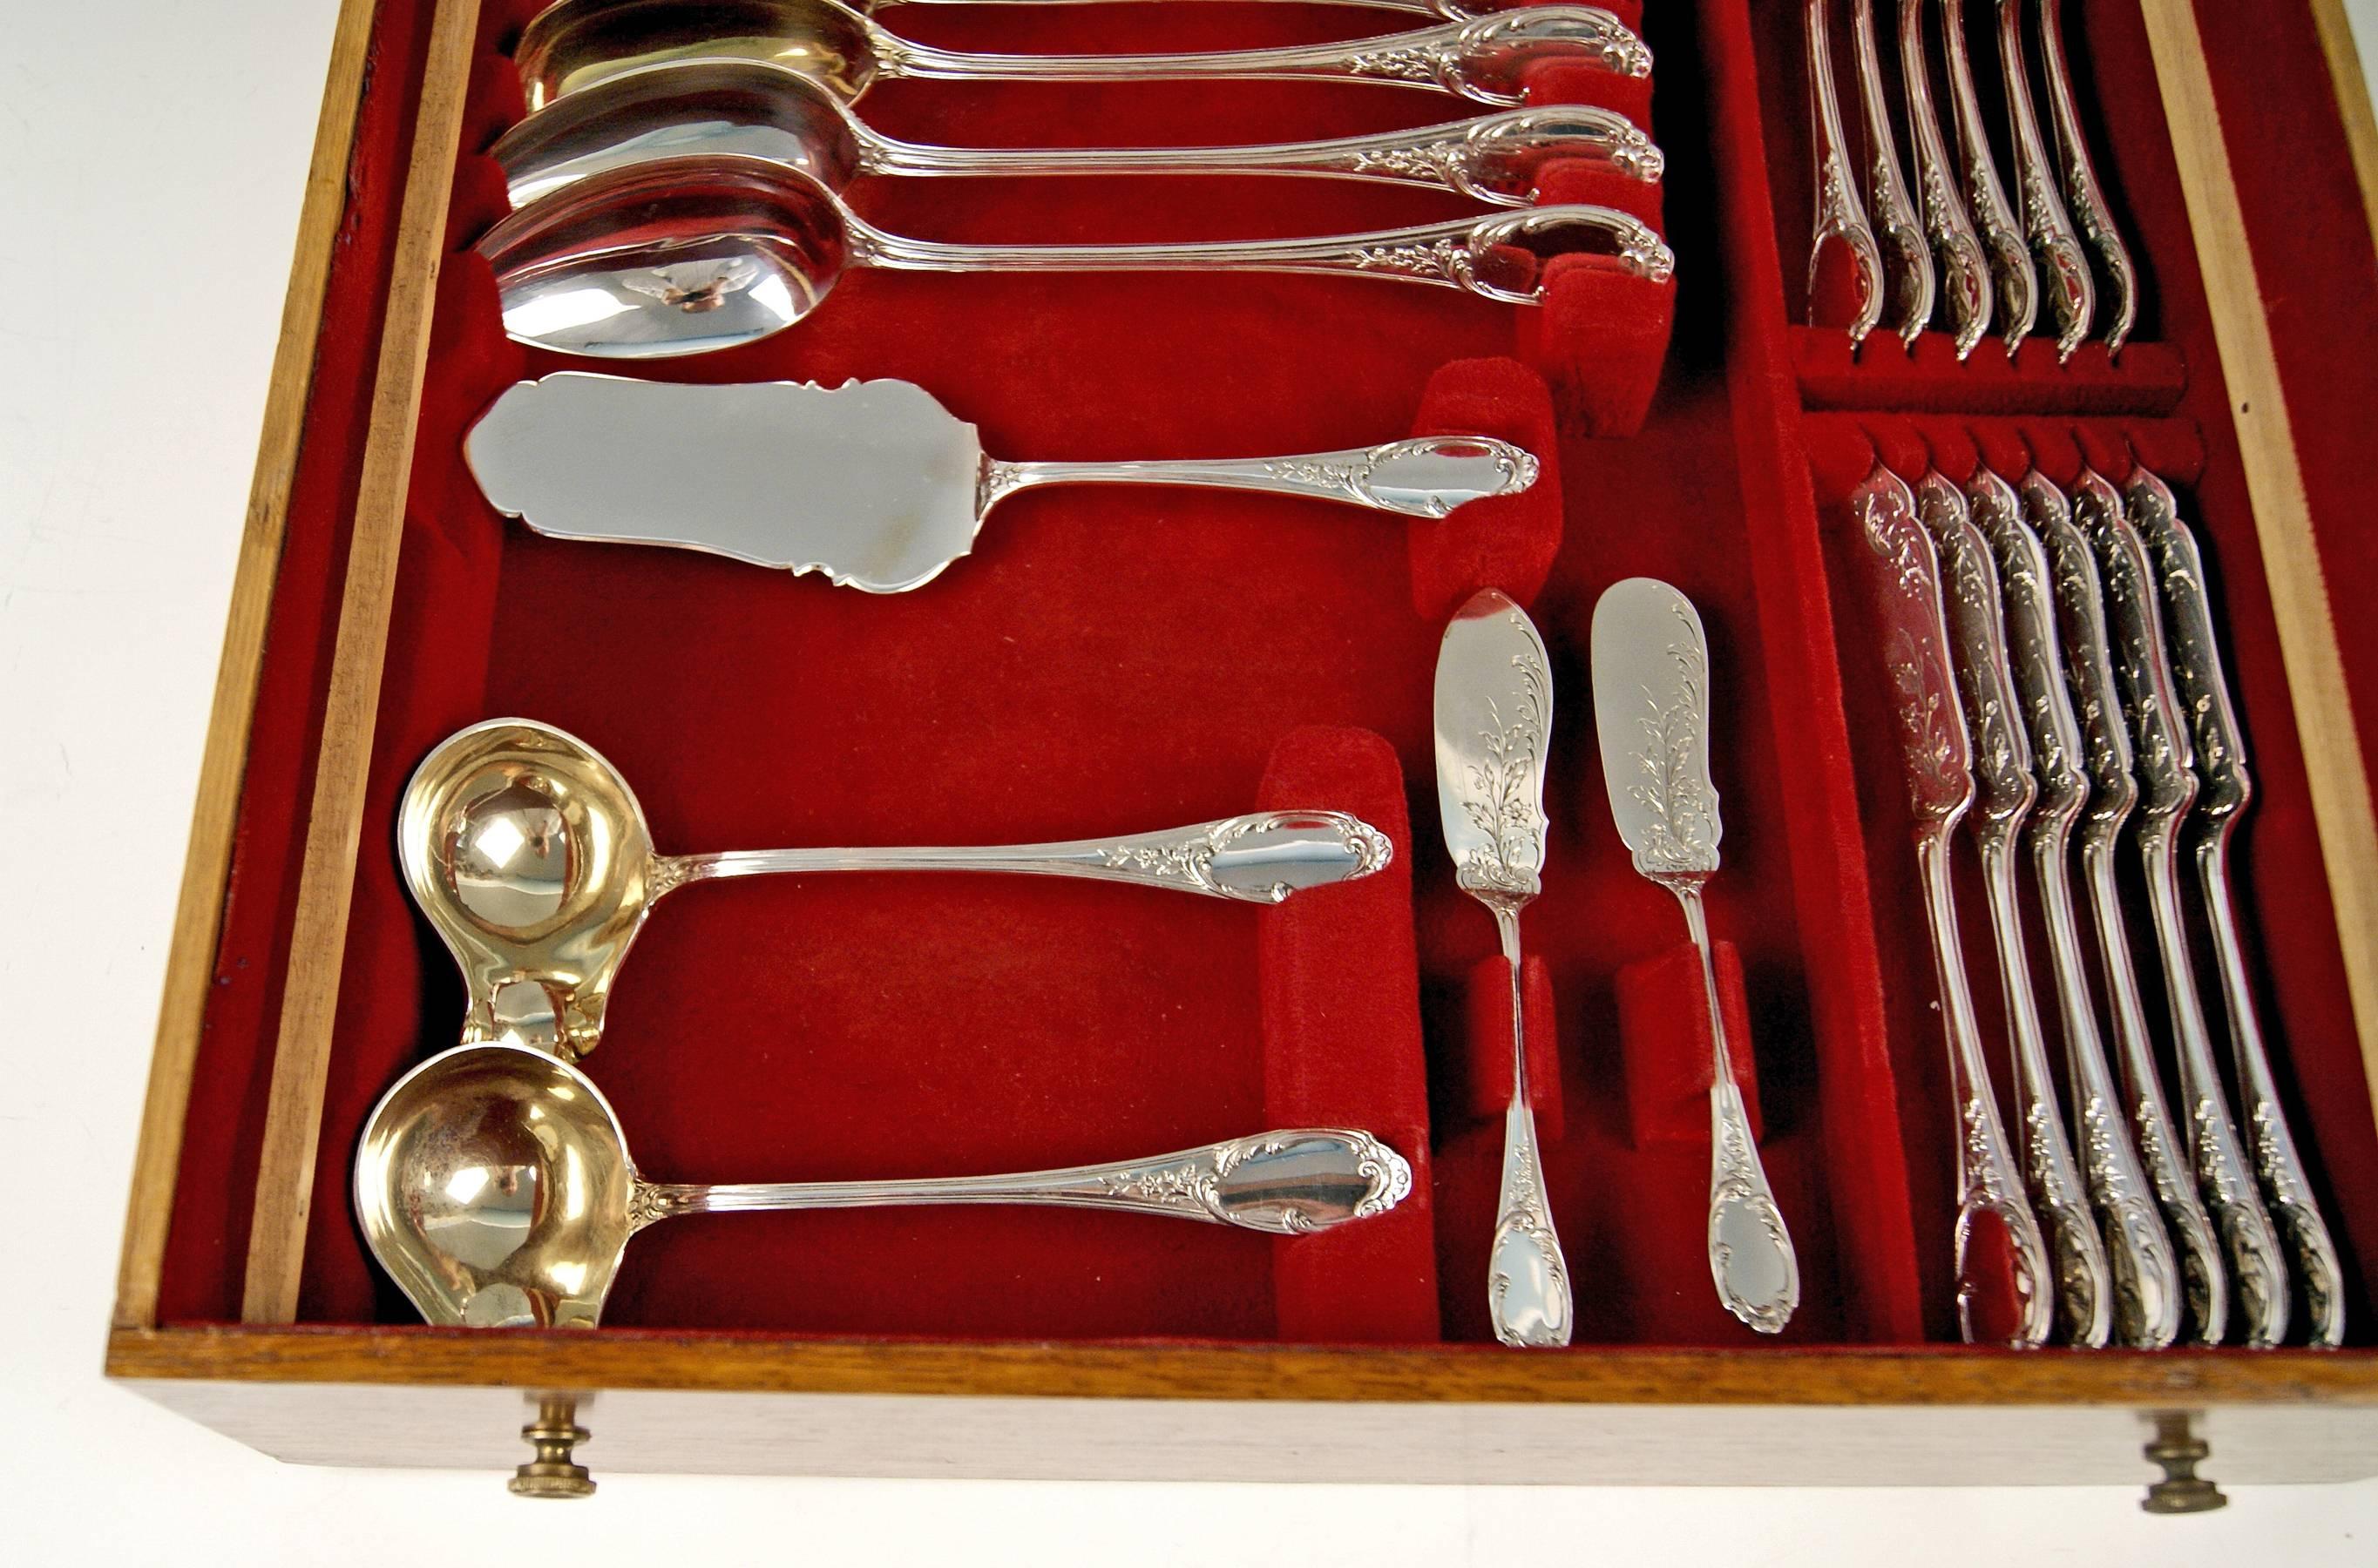 Late 19th Century Silver Flatware Cutlery for 12 Persons Bertsch Germany, circa 1890